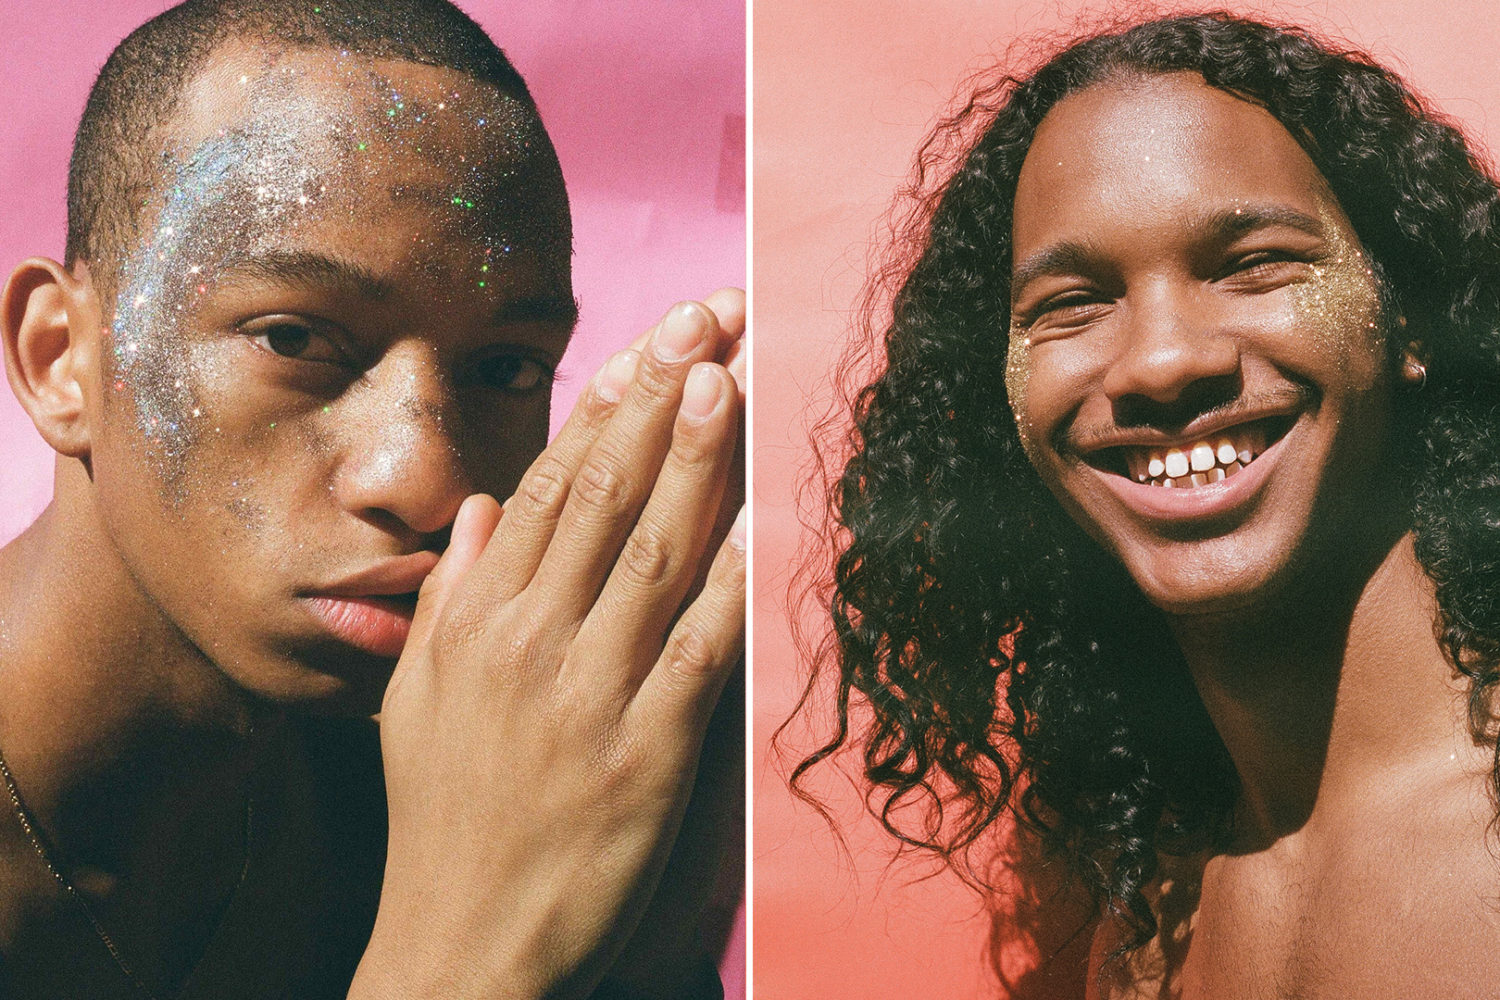 500px + CONTACT Photography Festival: Meet the artist redefining black masculinity with glitter